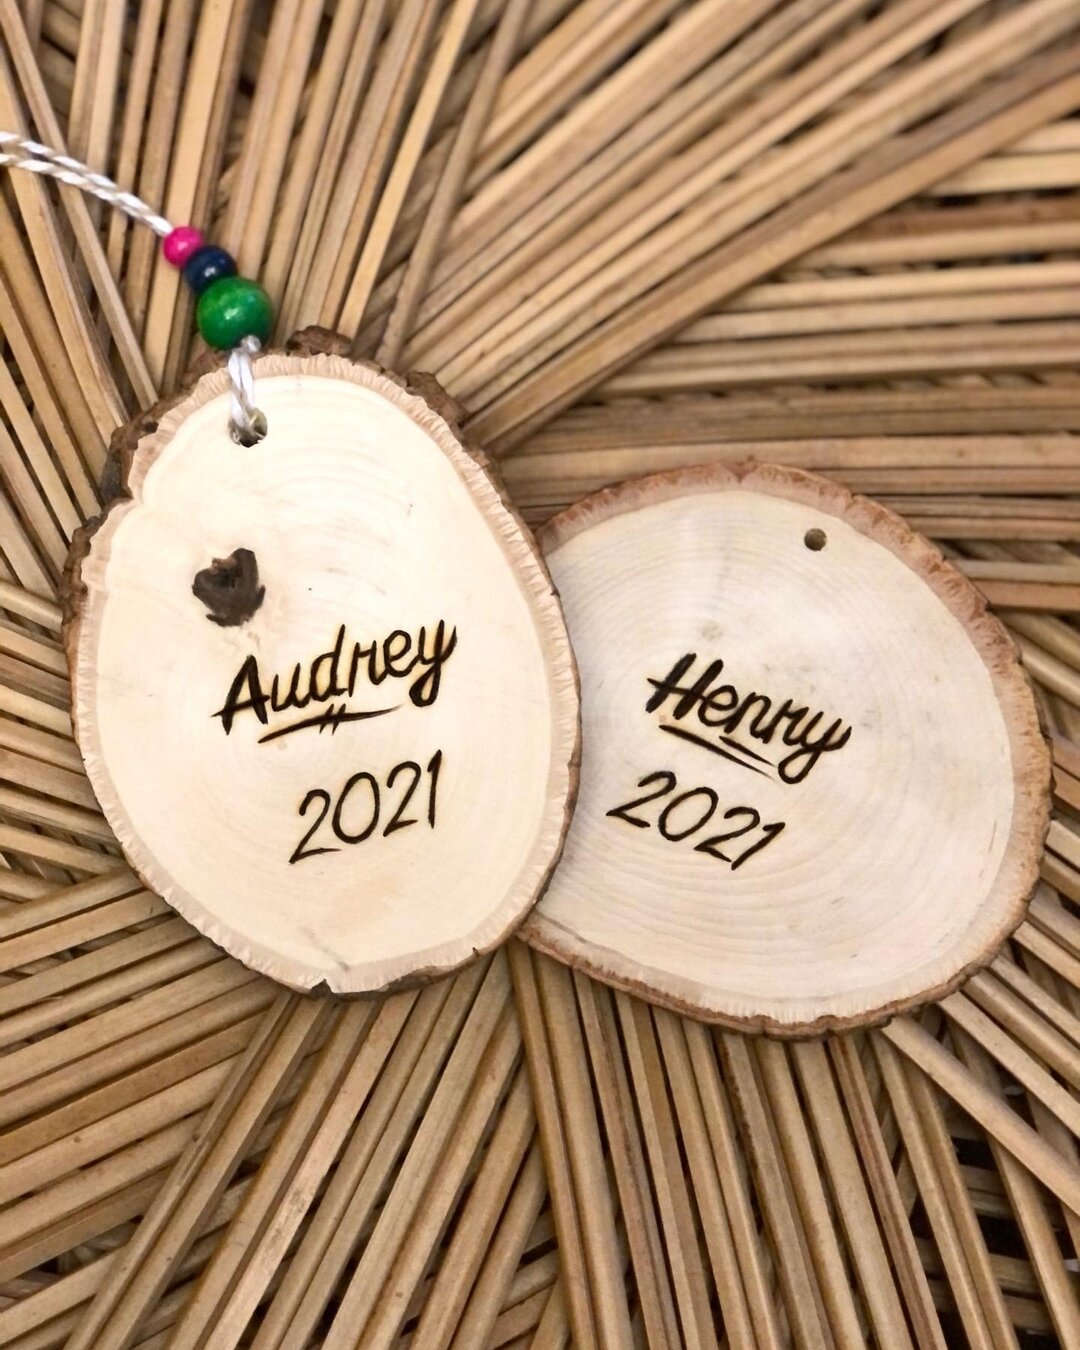 Don't forget: Customization is FREE with every ornament purchase!⁣DM to order your custom ornament now!

#handburned #woodburning #customart #ornament #christmas #christmasornament #woodart #ooak #giftideas #pyrography #artist